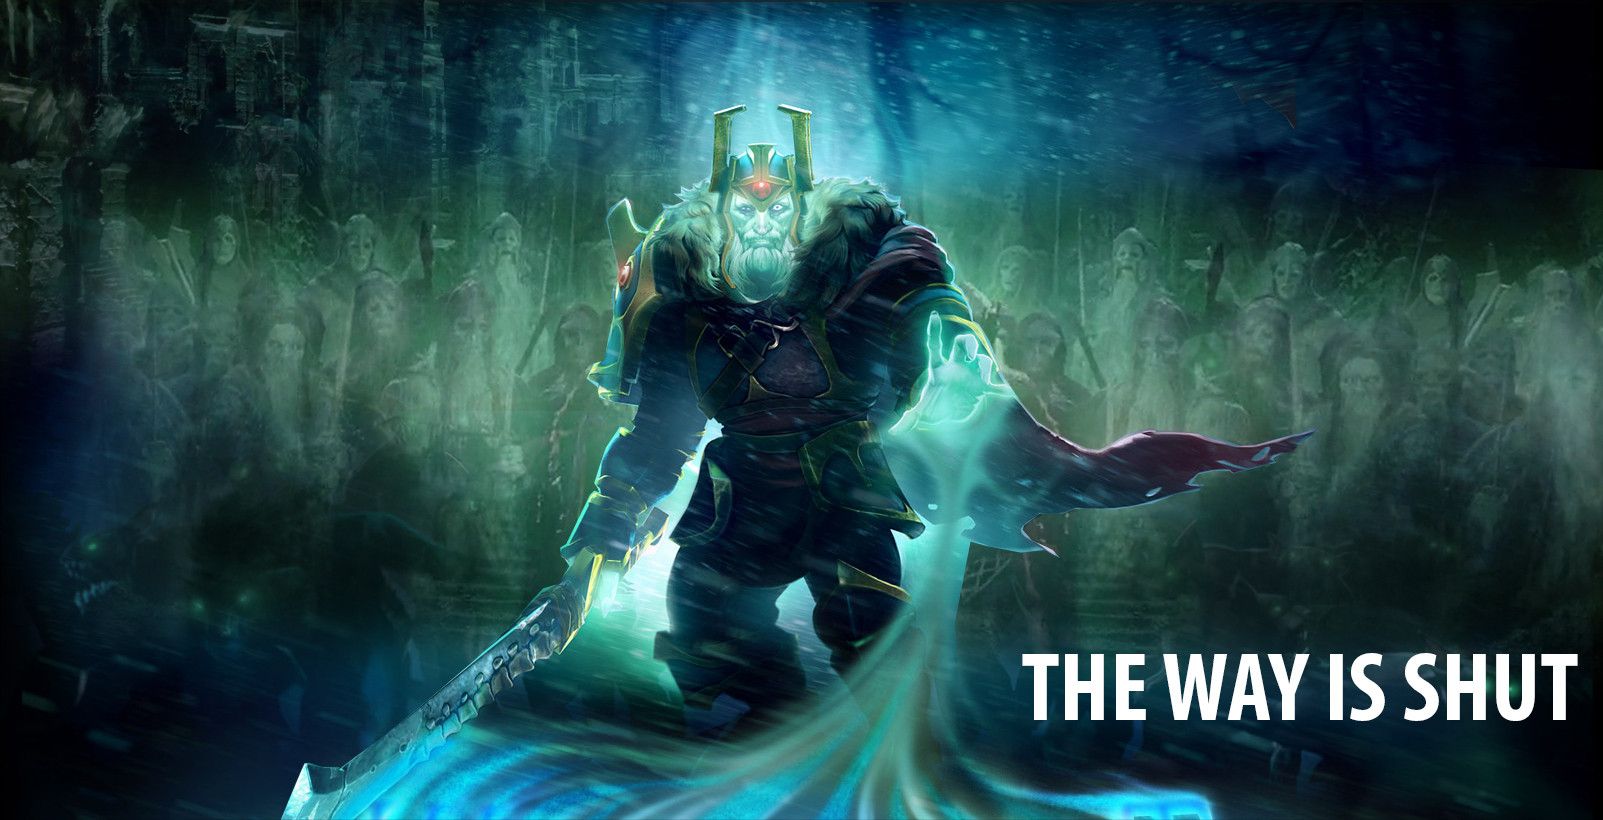 First thought when I saw Wraith King